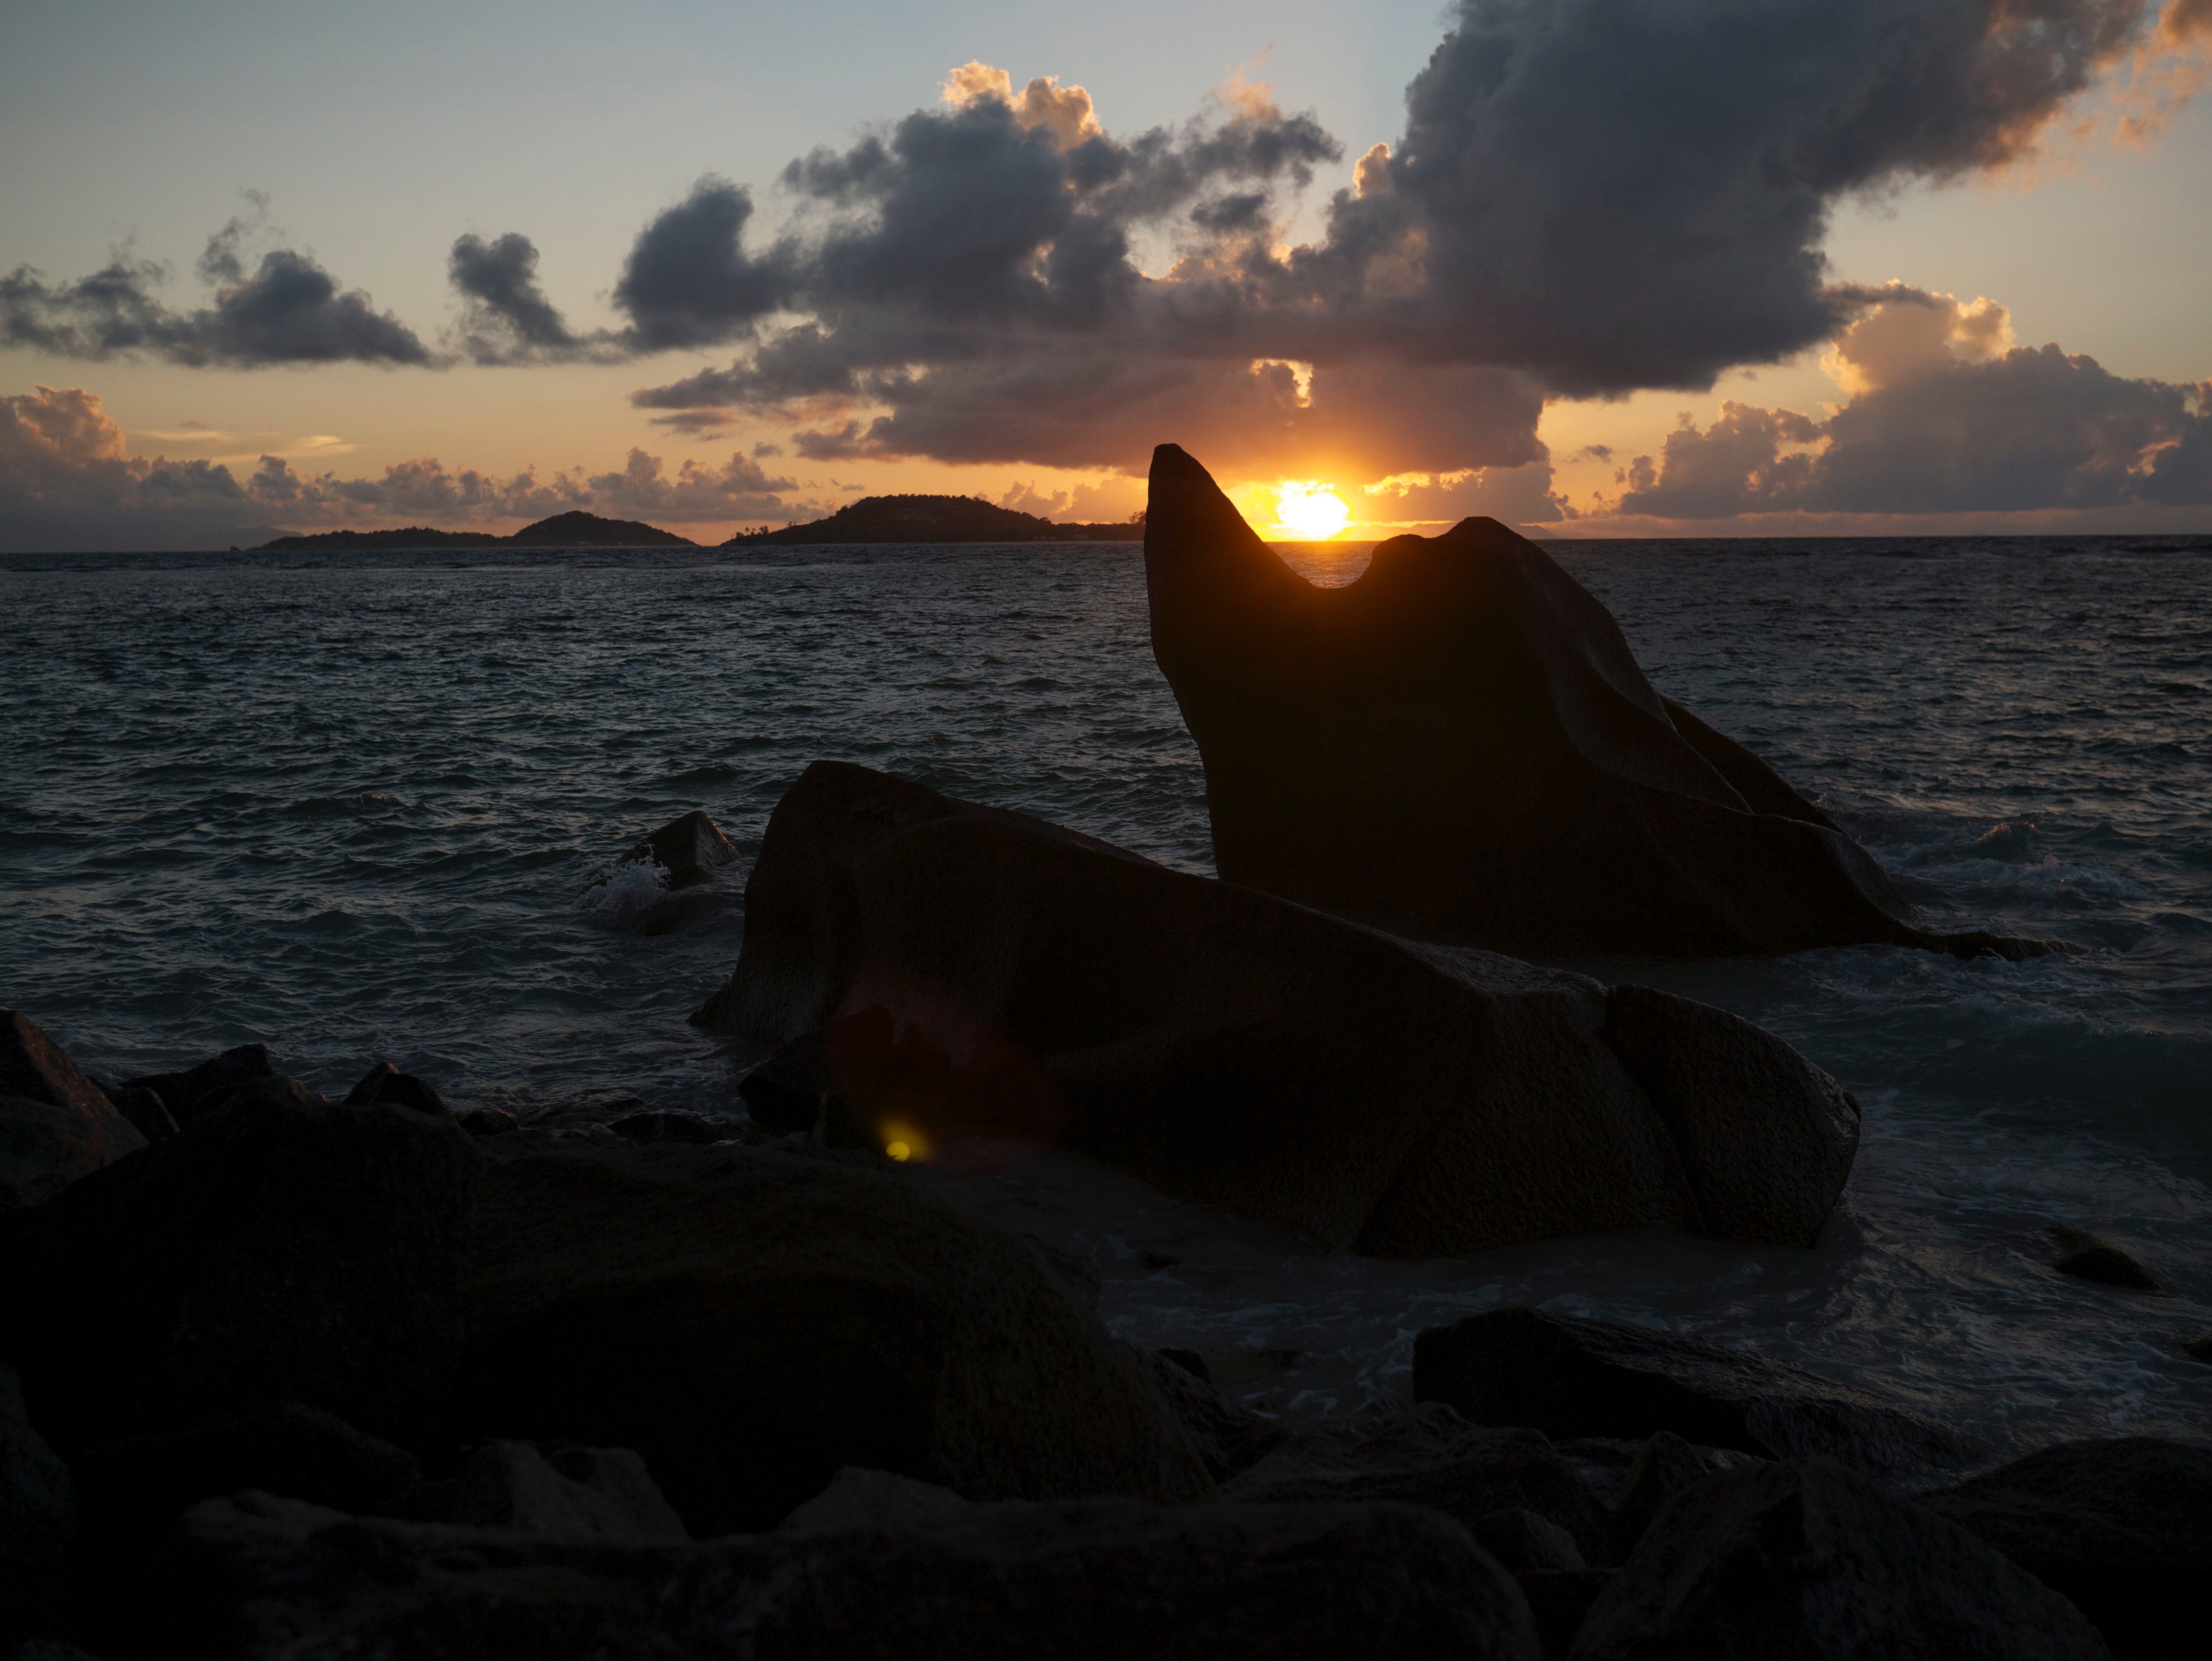 stunning places to watch sunsets in seychelles - sunset rocks